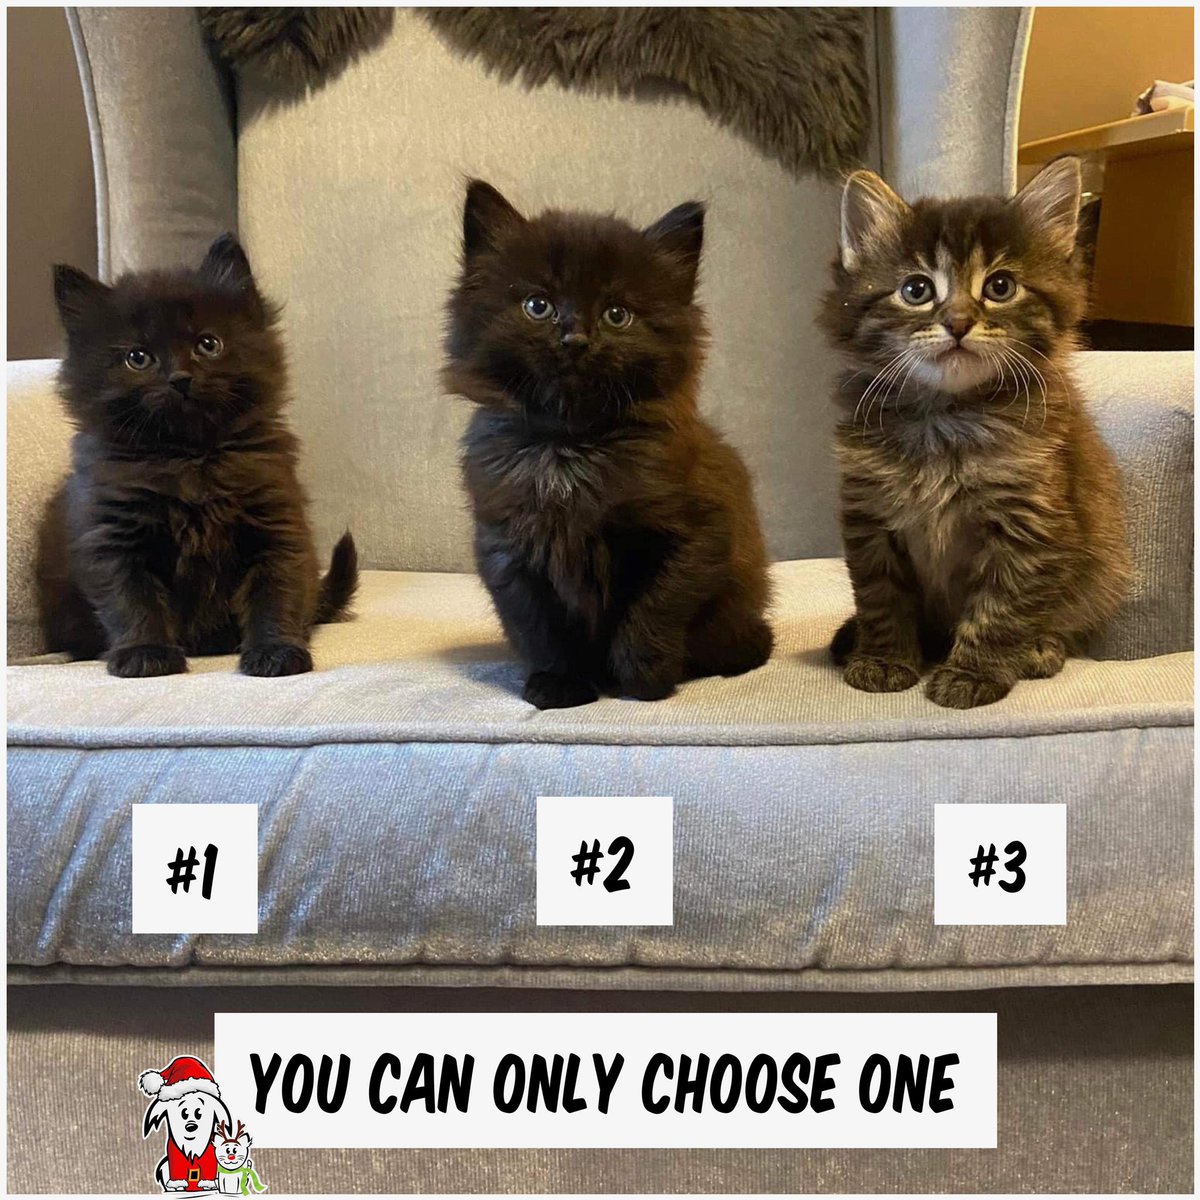 🥰🥰🥰🥰🥰 Meet Brom, Corbin and Vlad, probably some of the cutest little floofs we’ve ever seen! 🐱 And how did they sit so nicely for a photo? 📷 They’re not quite ready for adoption, but if you could pick one, which would it be? #AARCS #AdoptDontShop